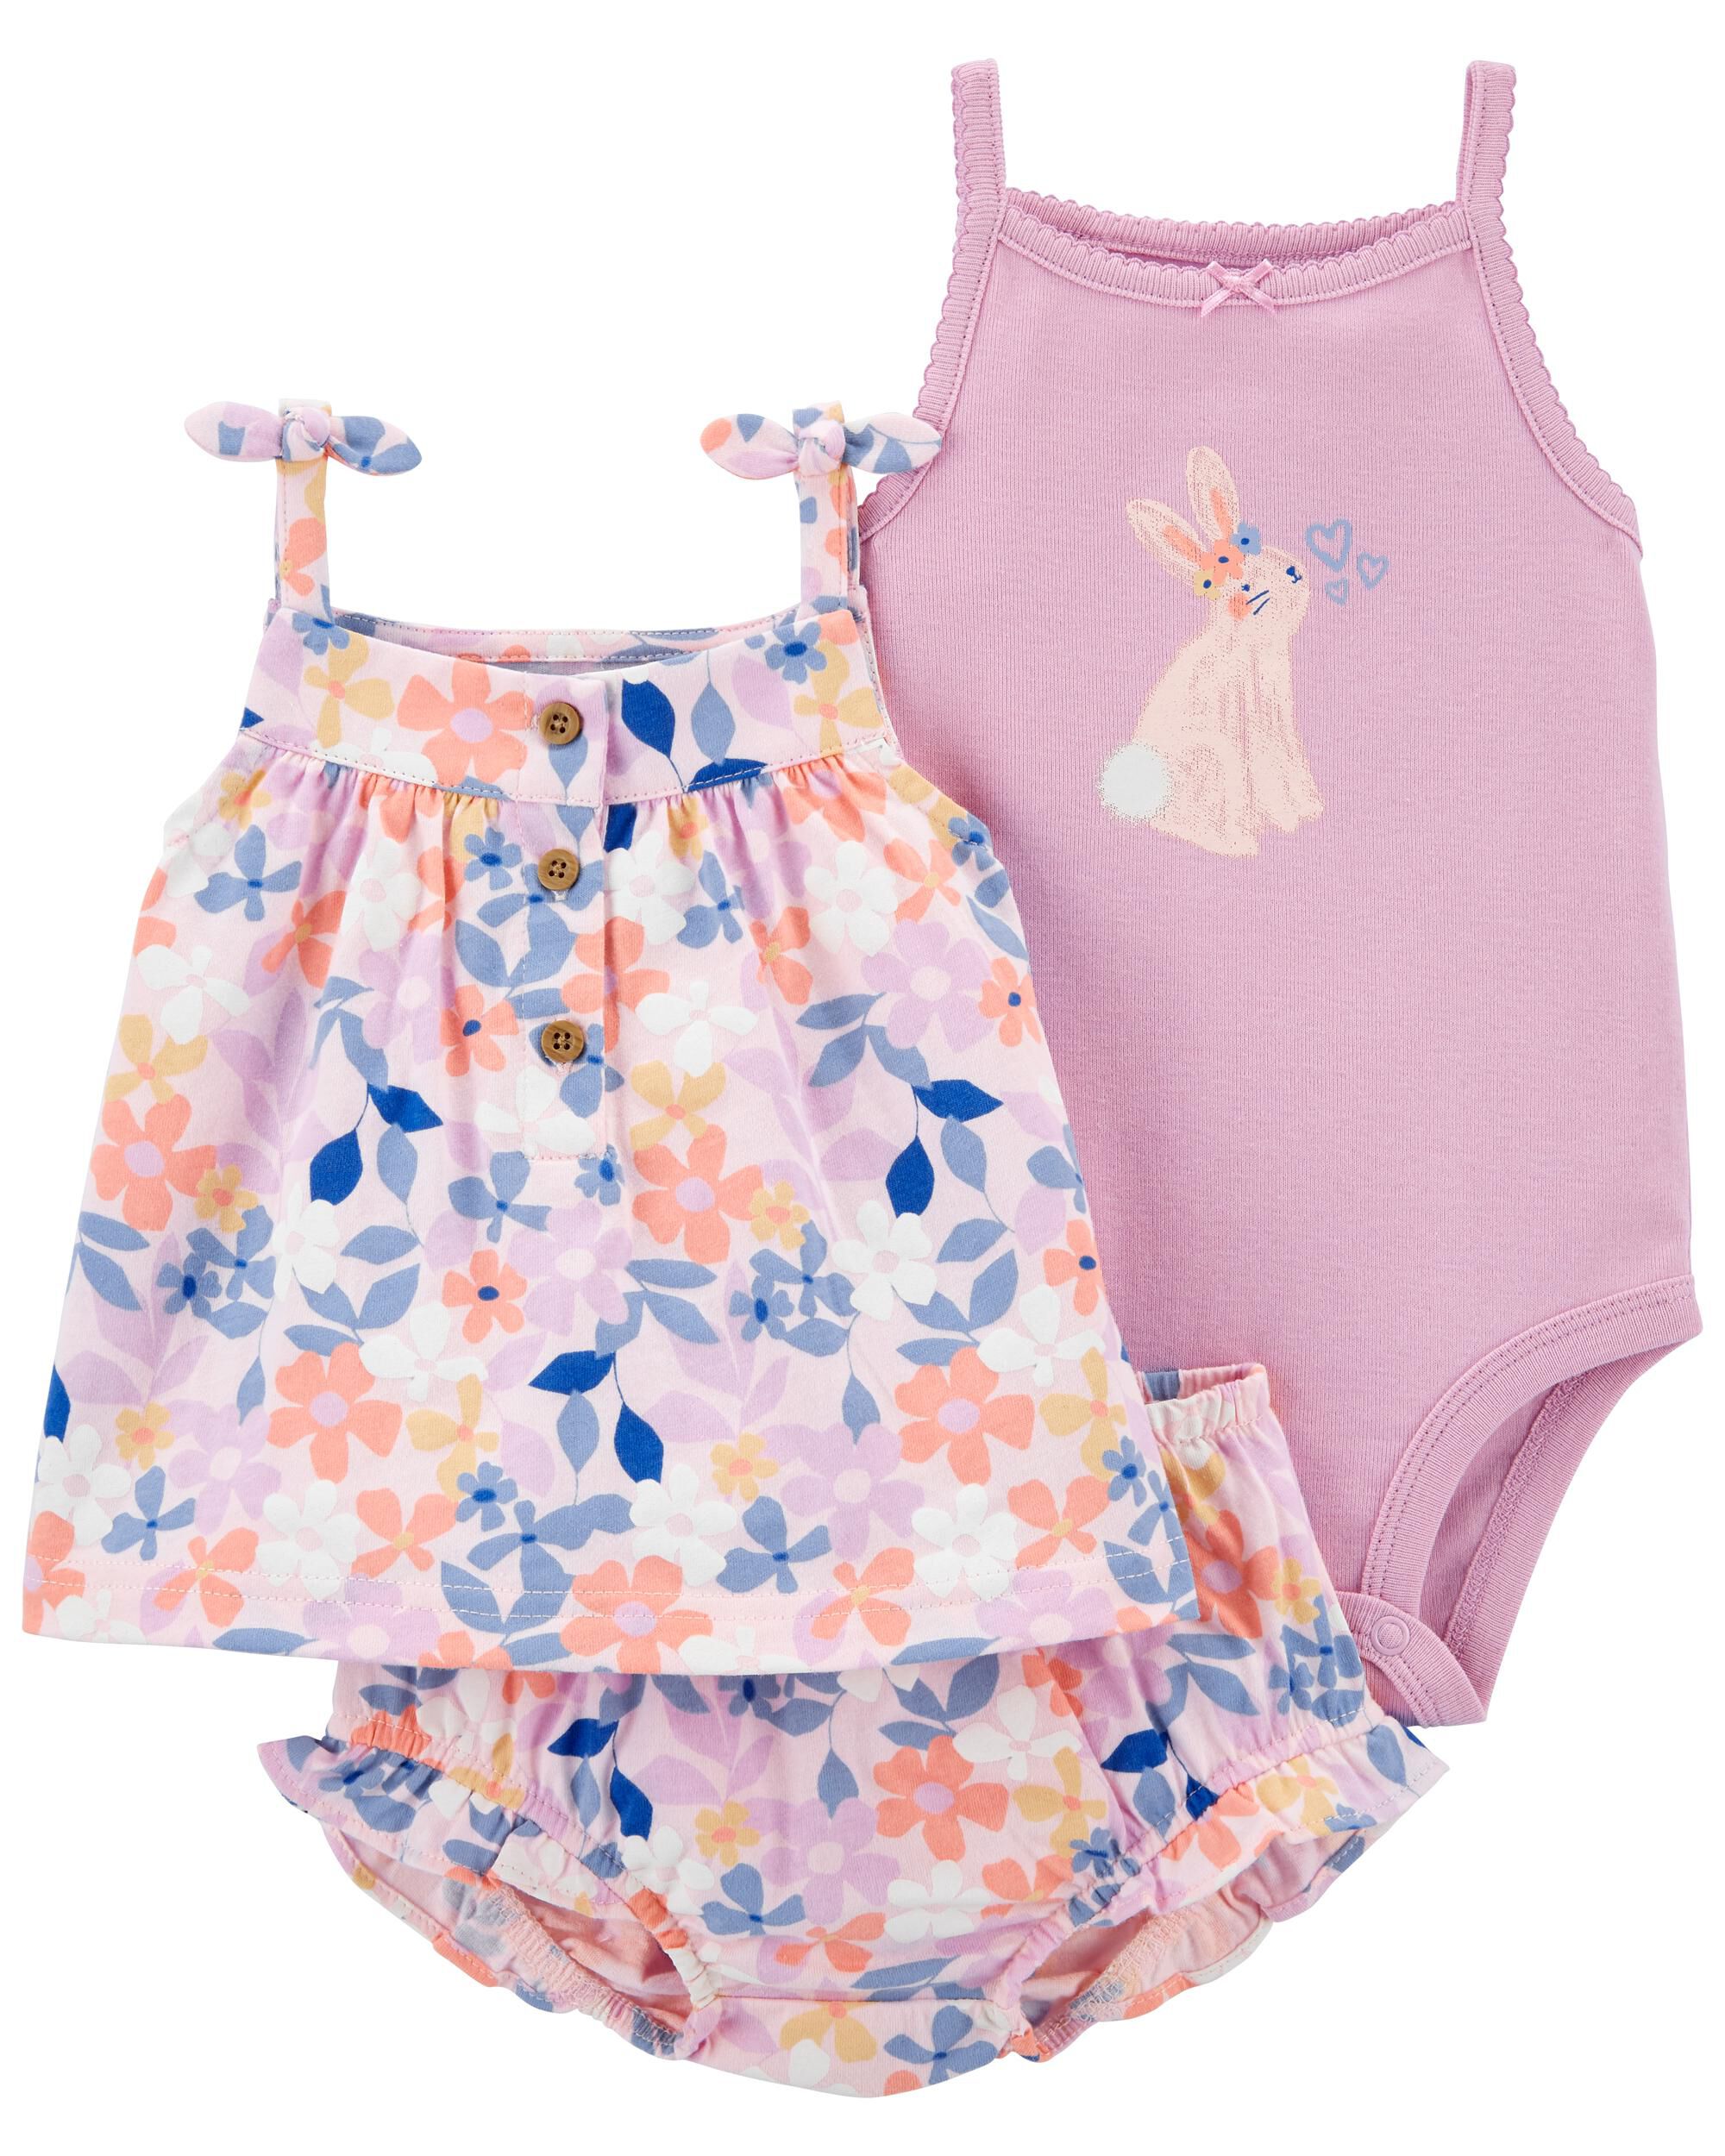 CARTER'S BABY GIRL'S 2 PIECE SHORT SET BRIGHT PINK GRAY  & WHITE  NWT 